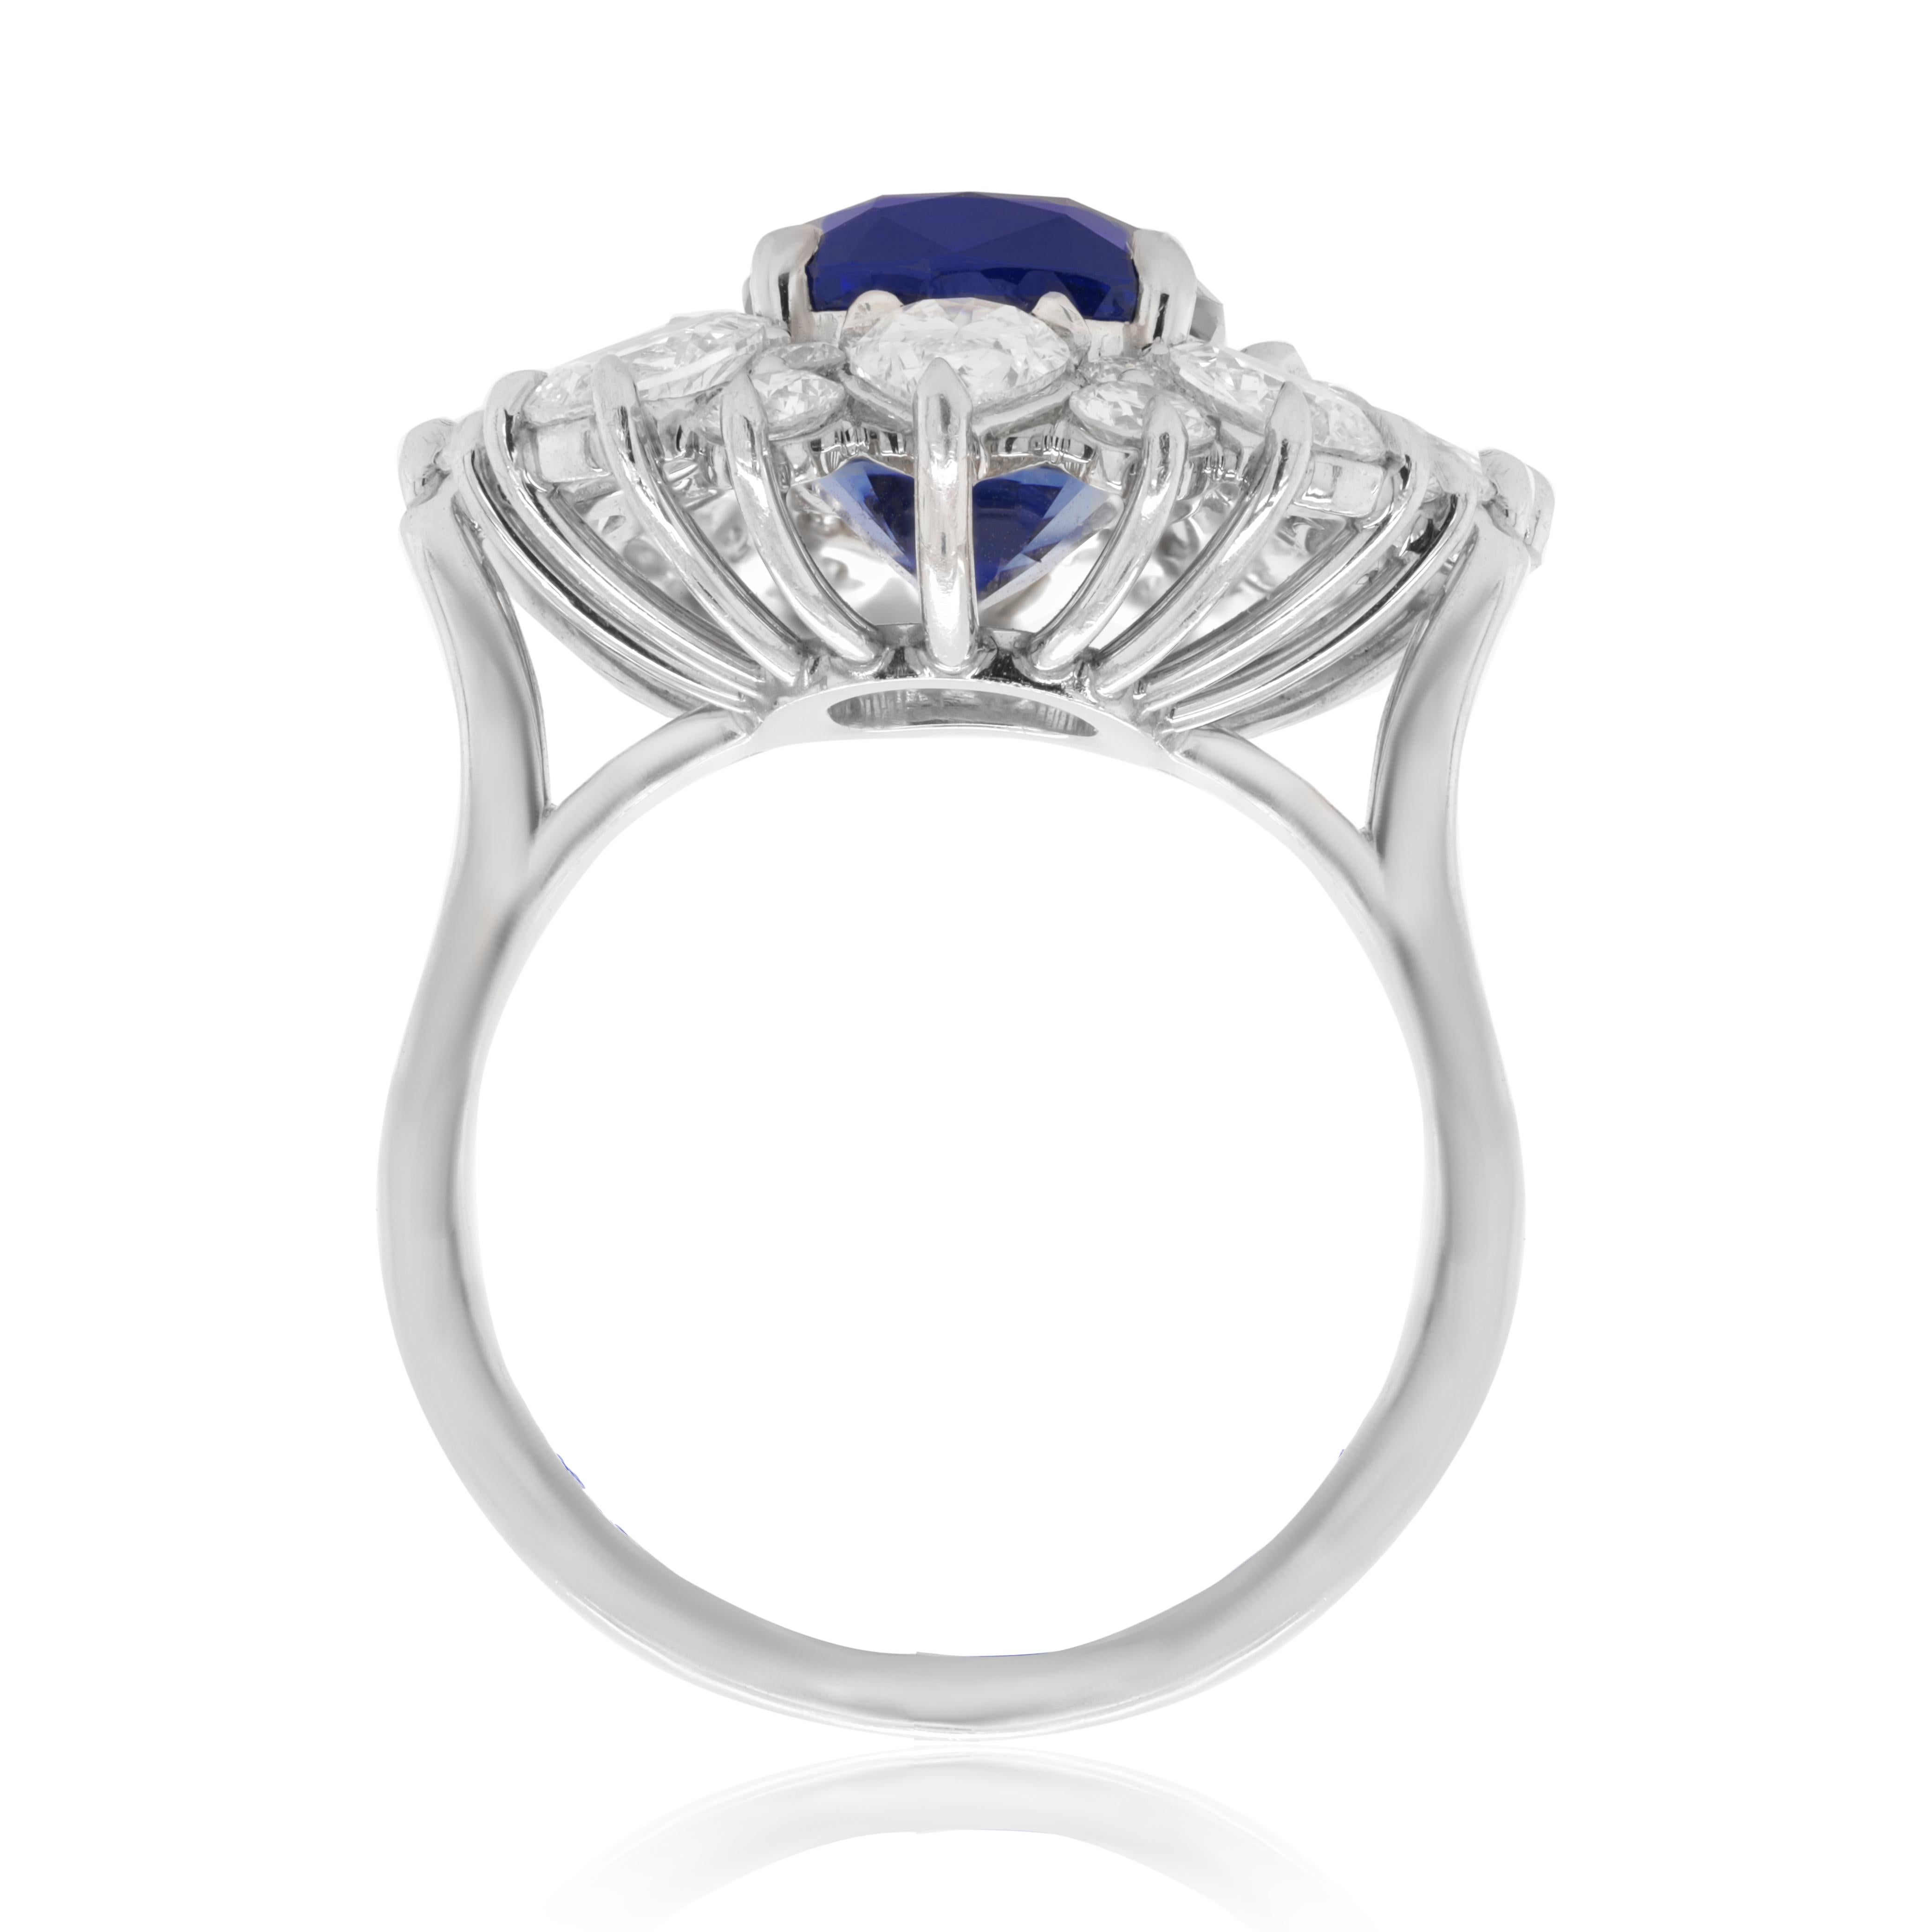 Platinum sapphire diamond ring with center gia certified natural burma blue cushion cut sapphire 5.98ct set with pear shape and round diamonds (3.04ct) all the way around. no heat.

Diana M. is a leading supplier of top-quality fine jewelry for over